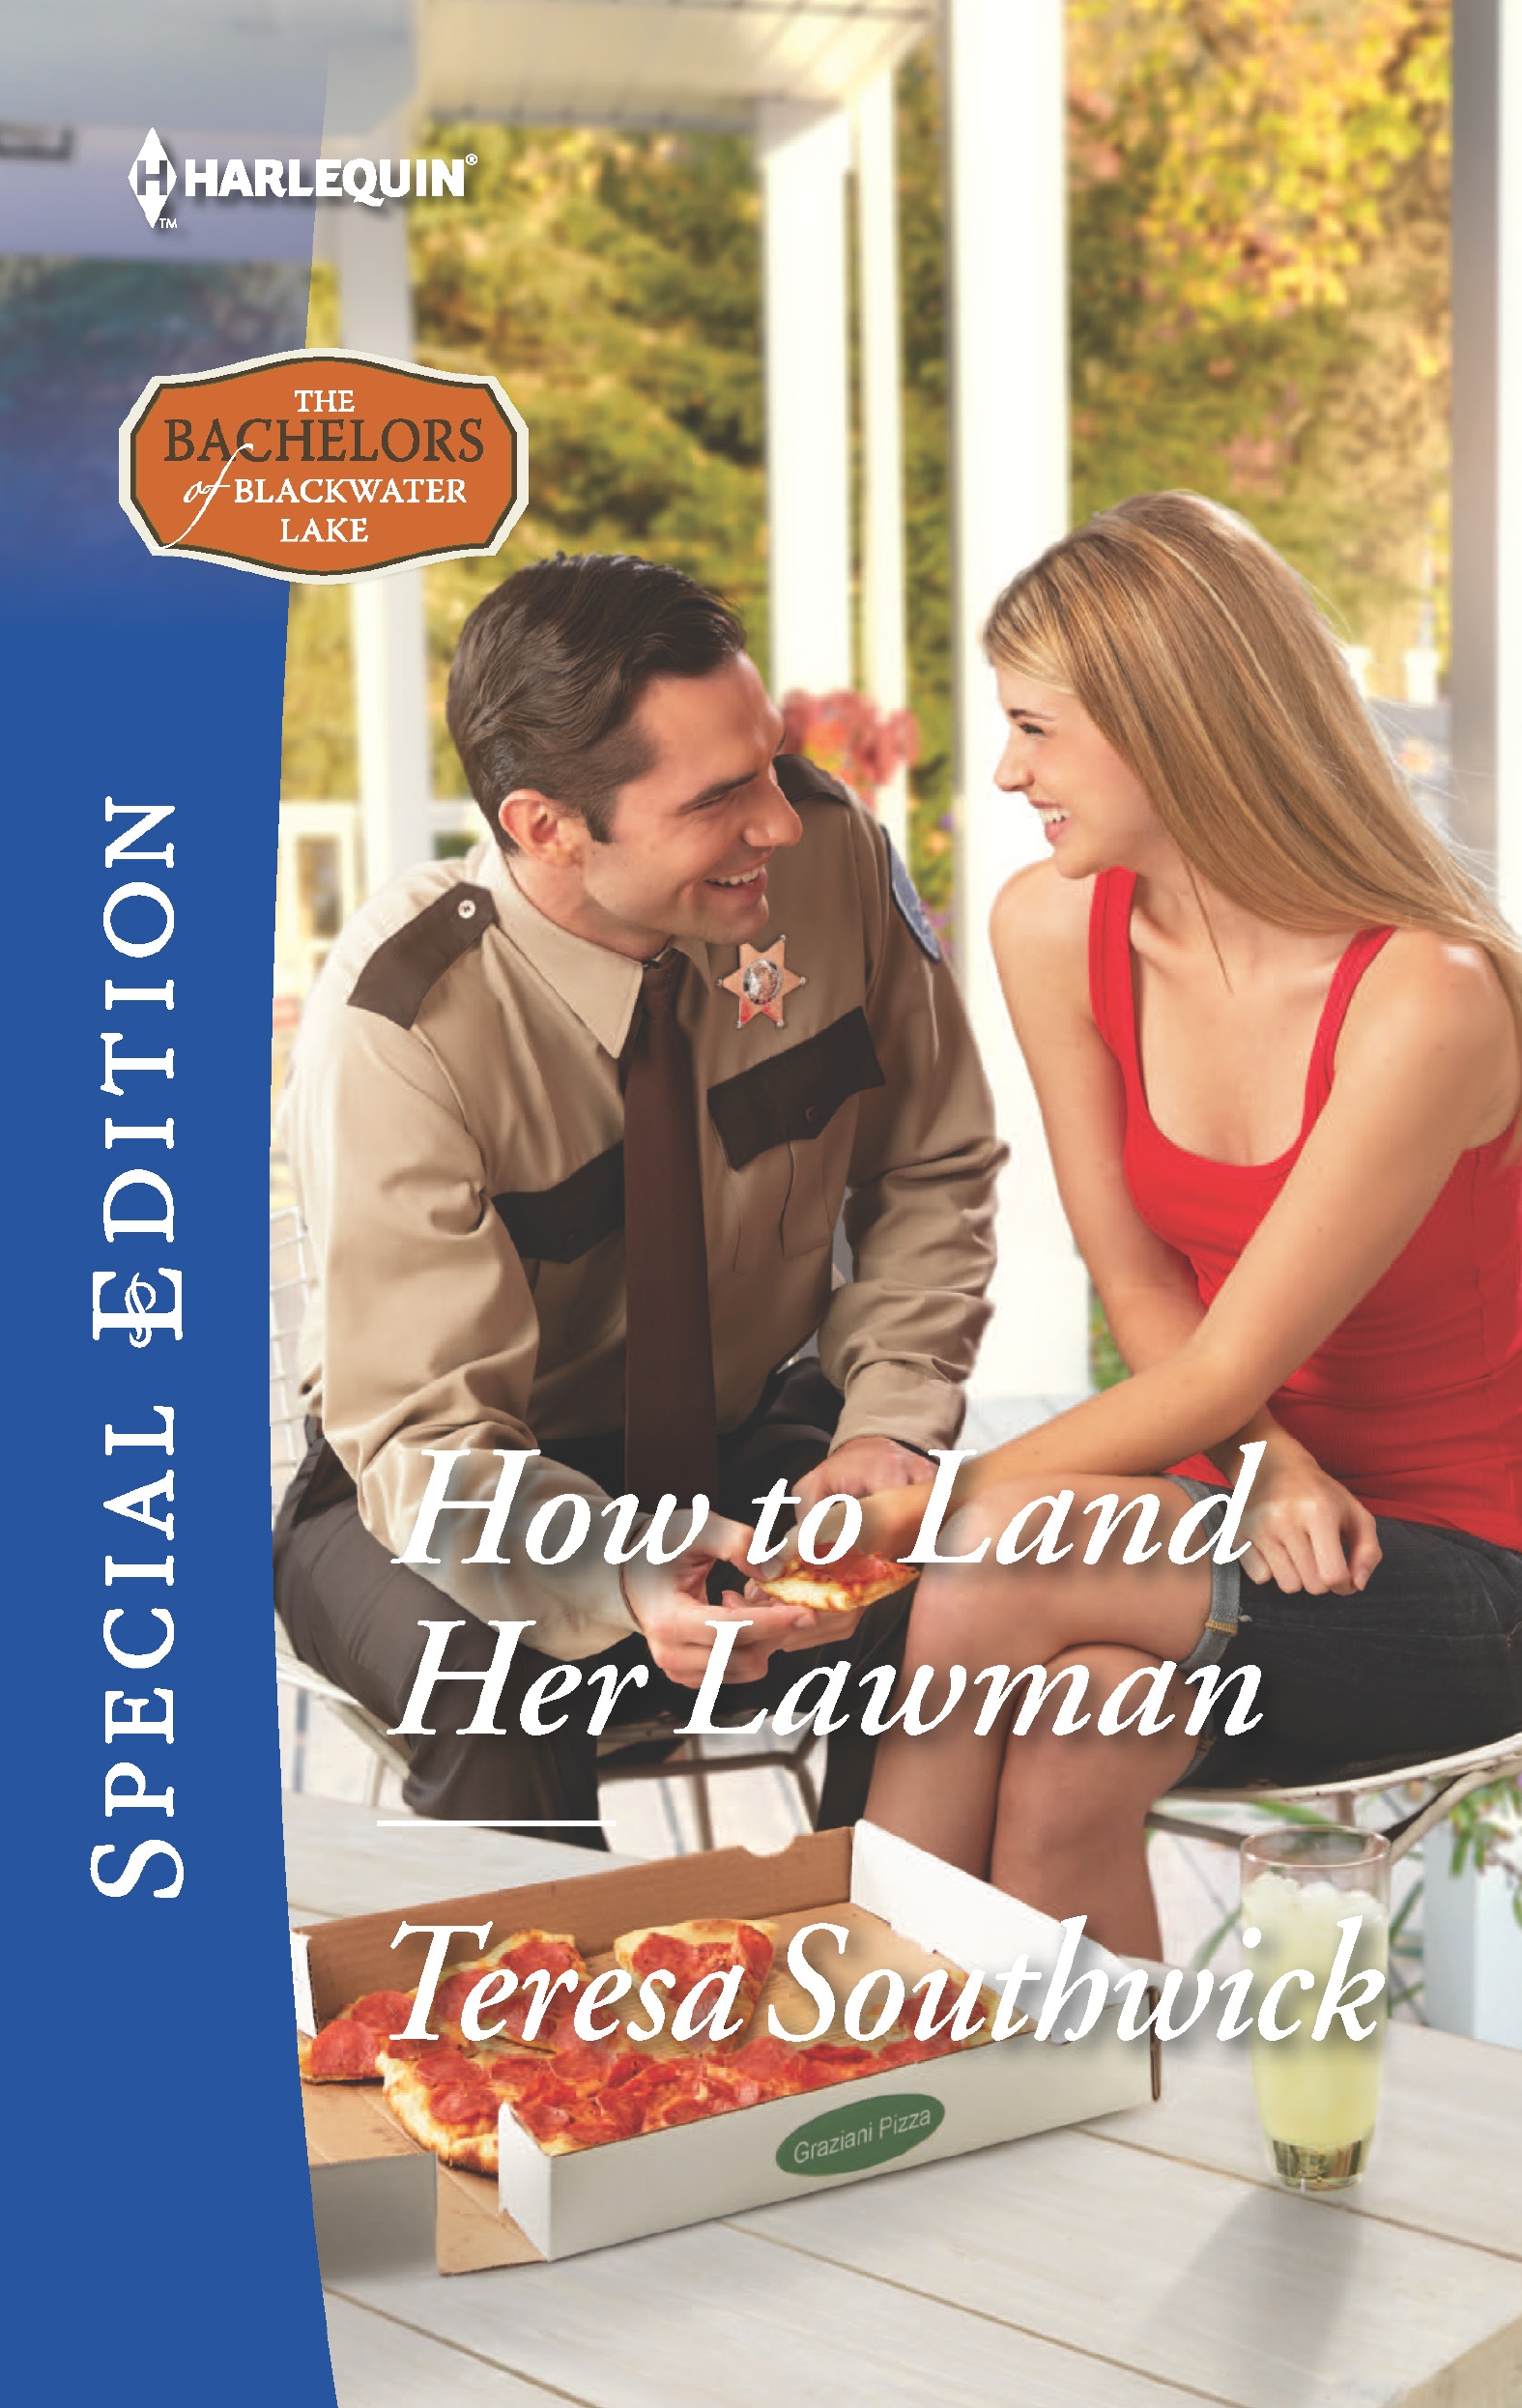 How to Land Her Lawman (2016) by Teresa Southwick